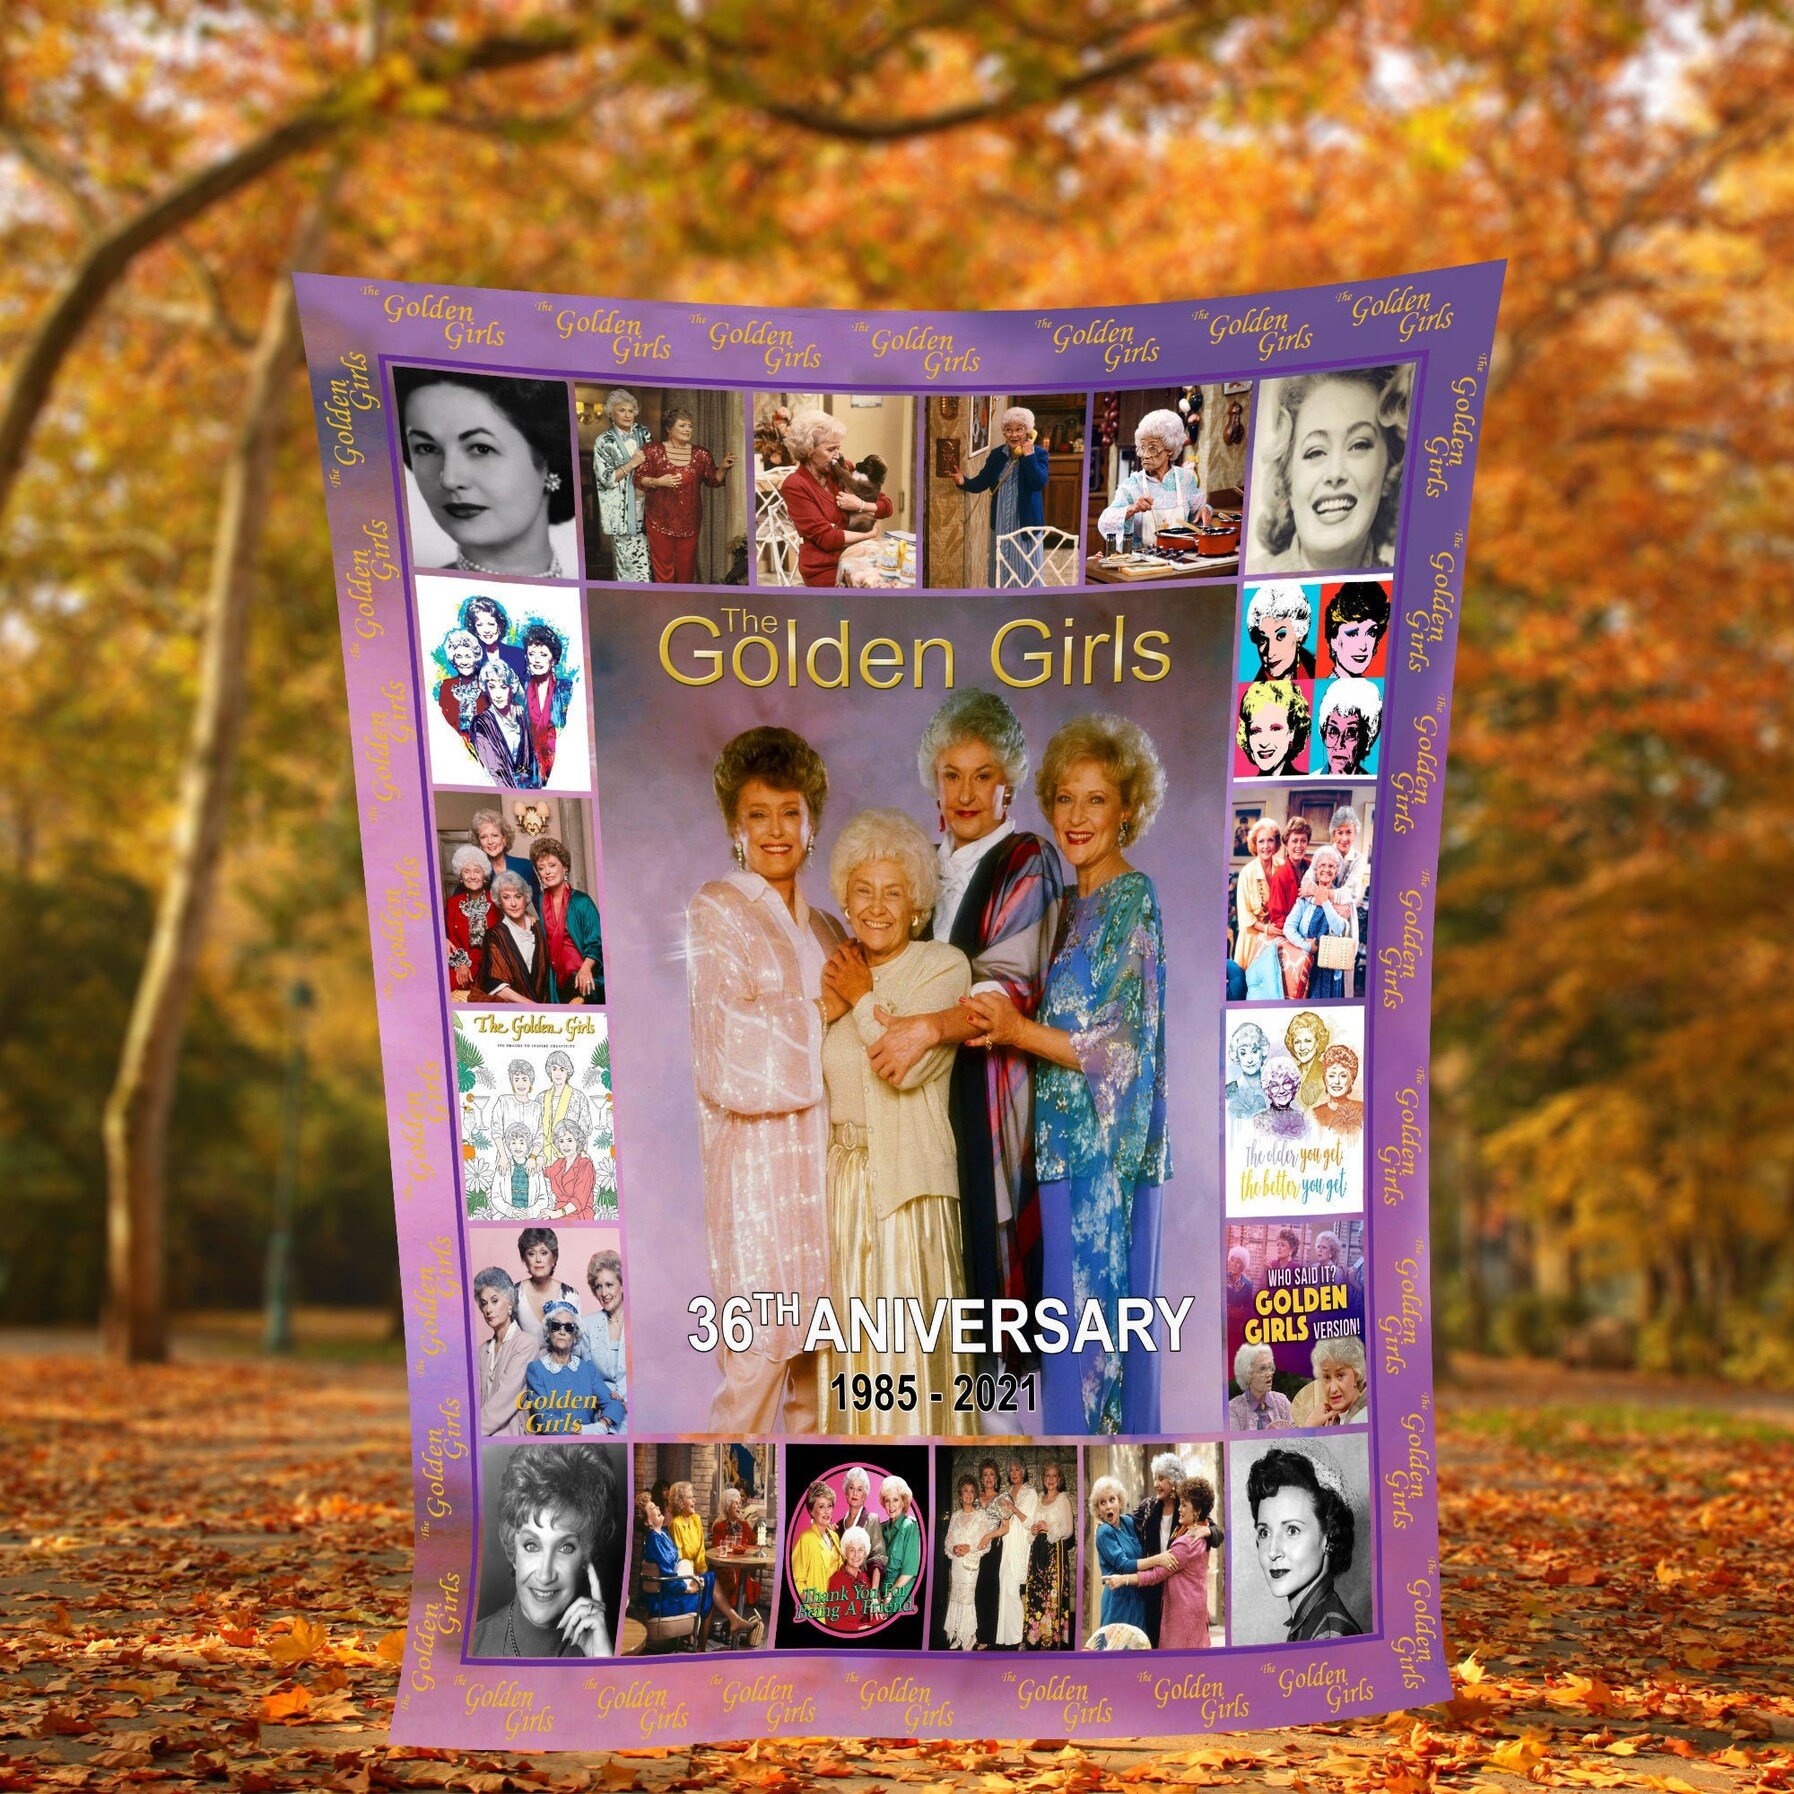 The Golden Girls 36th Anniversary thank you for being a friend fleece blanket 4